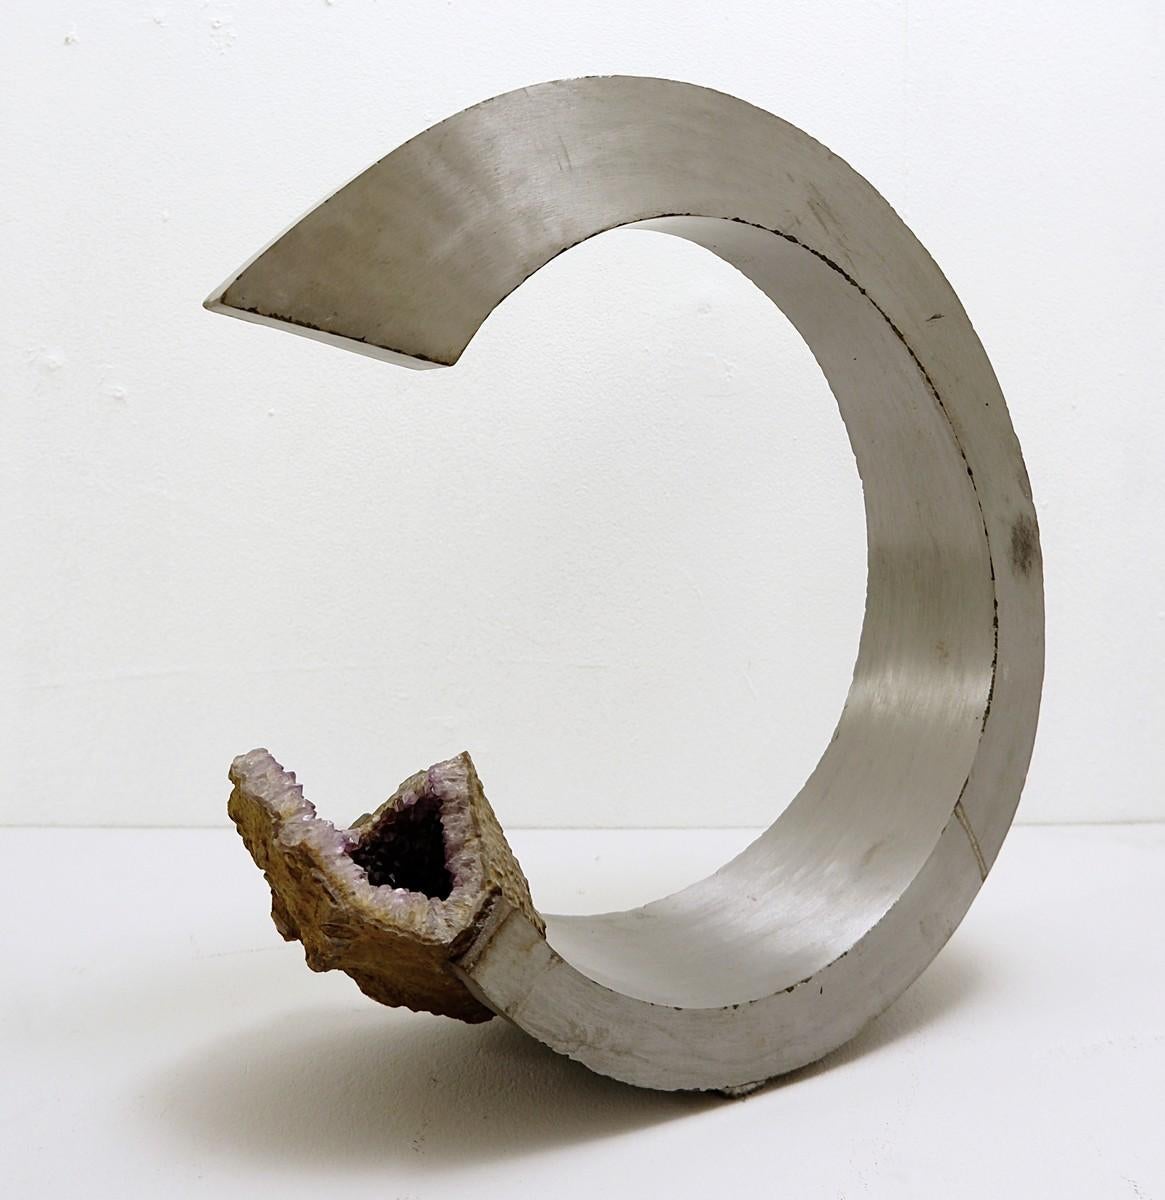 Amethyst in Brushed Aluminum Arc Sculpture, Italy, 1970s For Sale 1